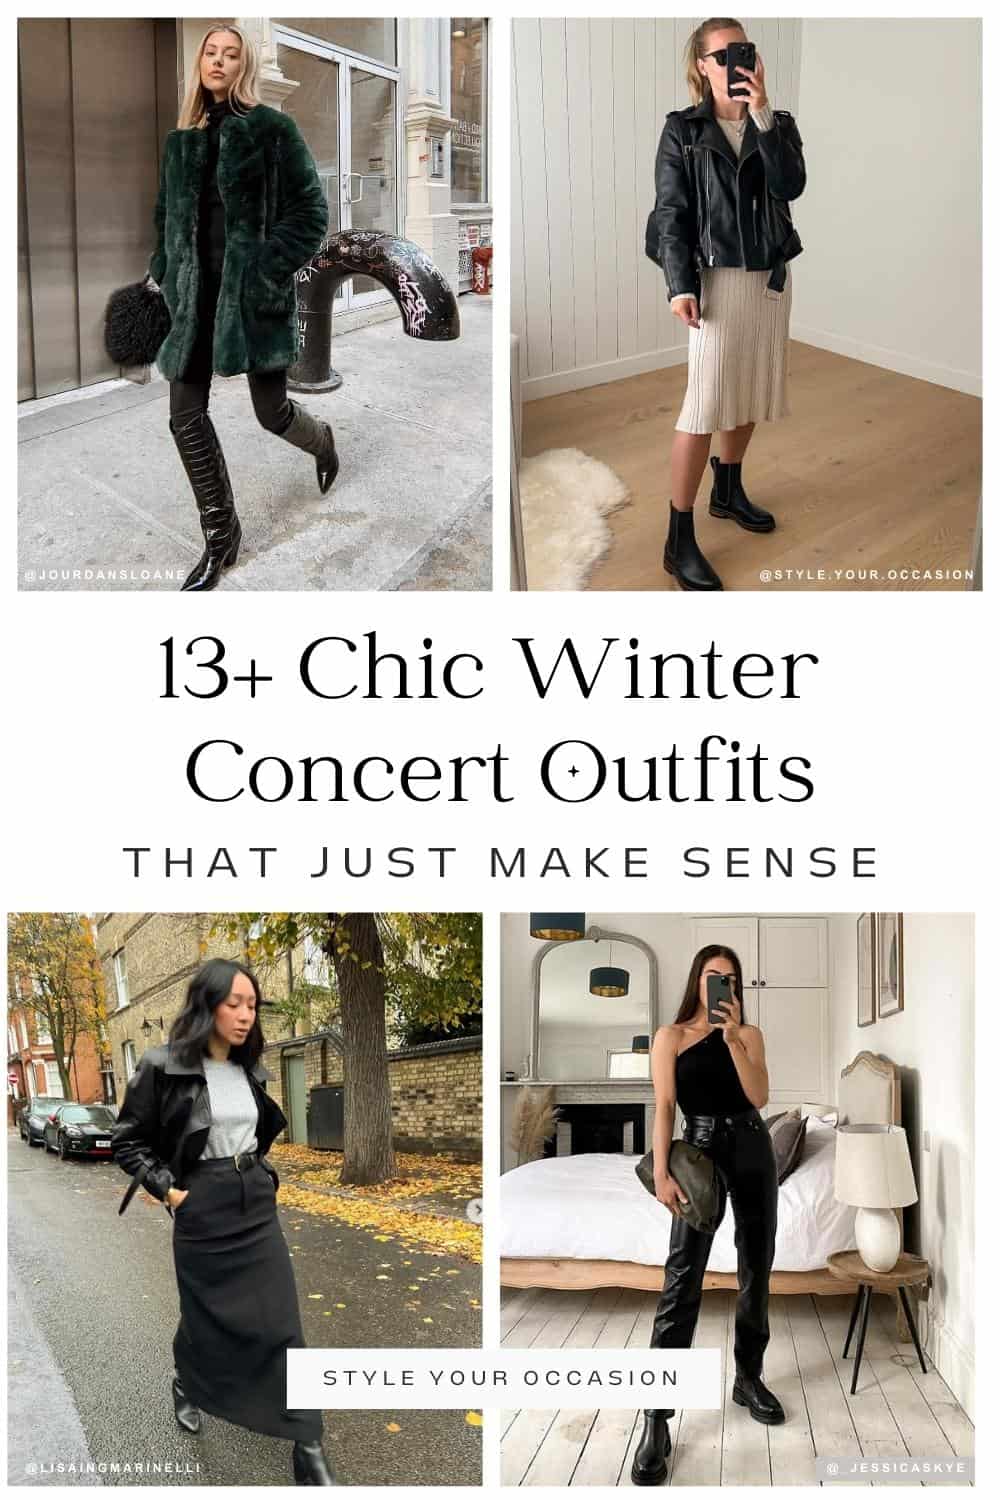 13+ Chic Winter Concert Outfits That Just Make Sense